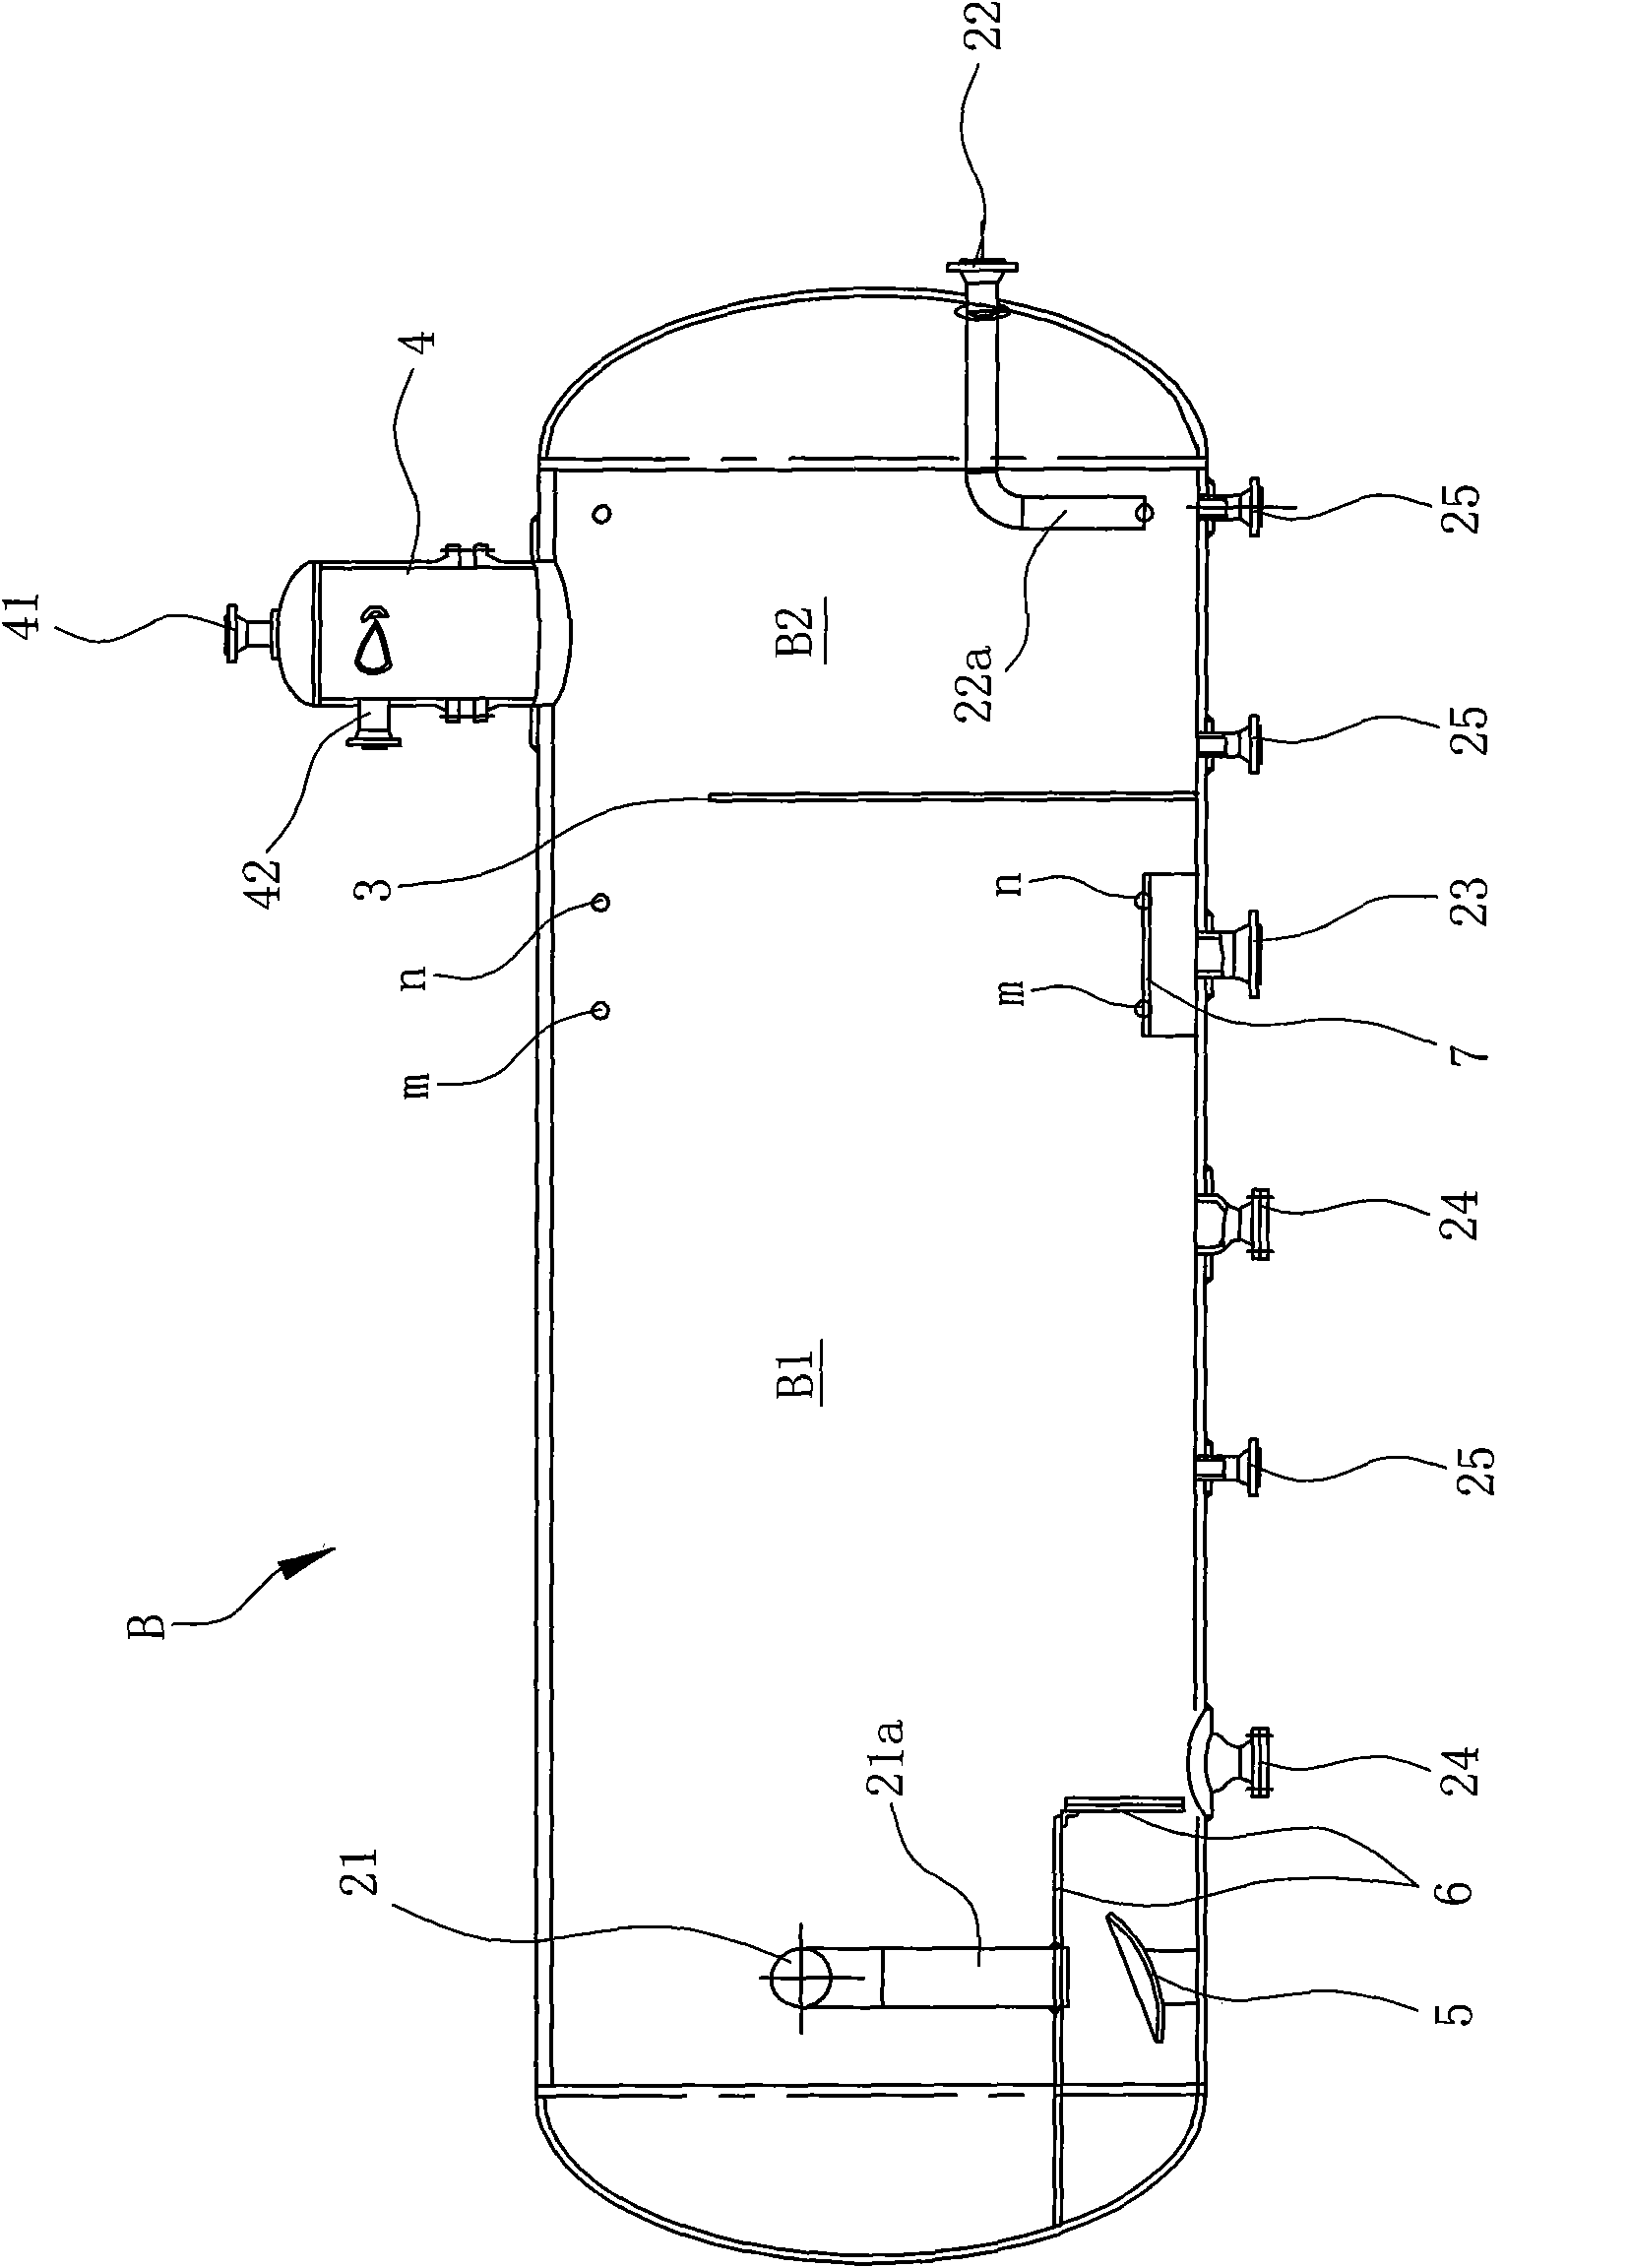 Gas-oil-water three-phase separating device